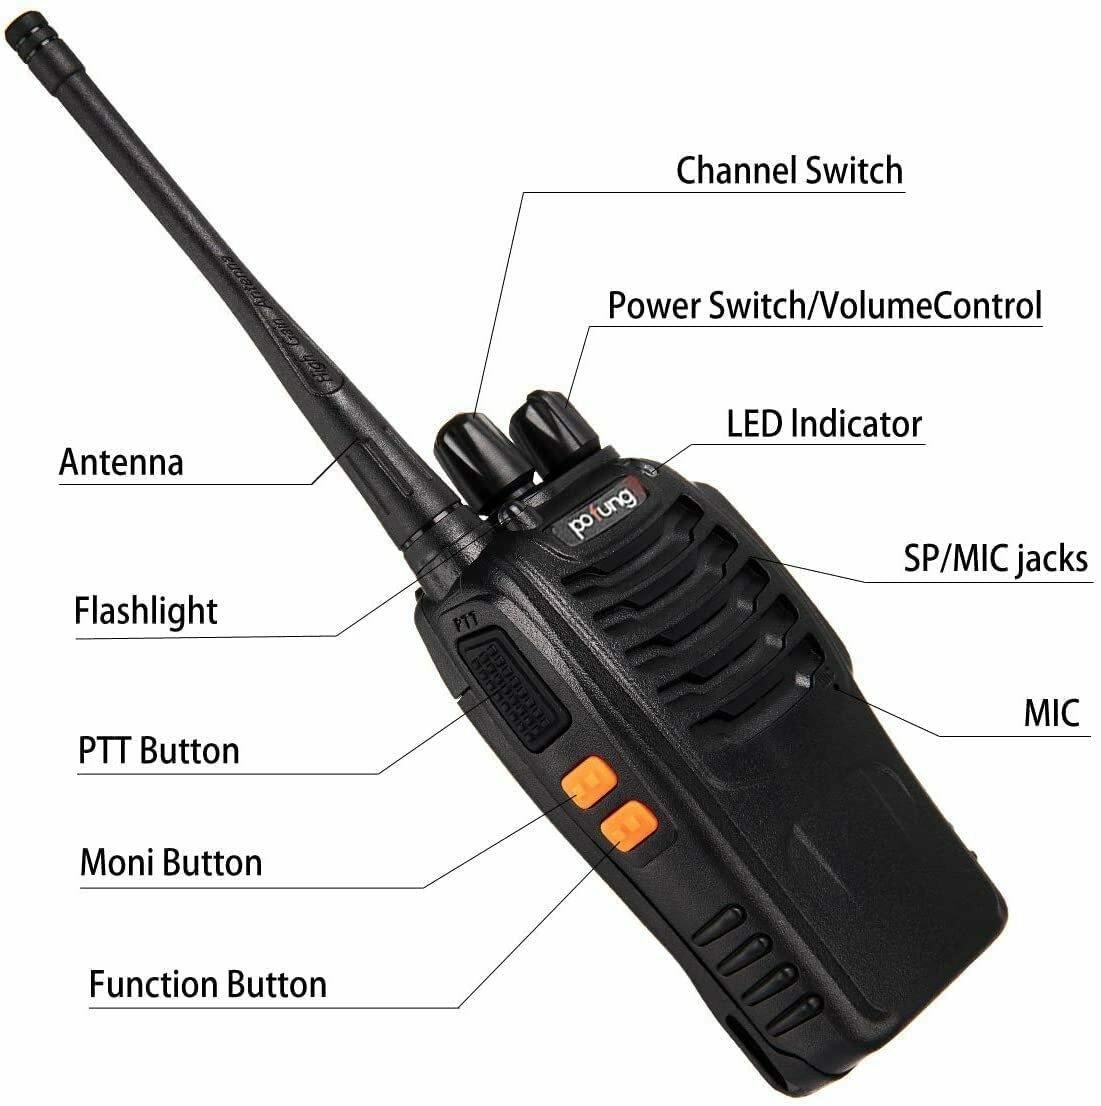 ele-espirit-two-way-radios-long-range-walkie-talkie-for-adults-with-headphones-16-channels-handheld-two-way-radios-with-two-flash-lights-product-images-orv1ua2o80m-p594217455-3-202210041600